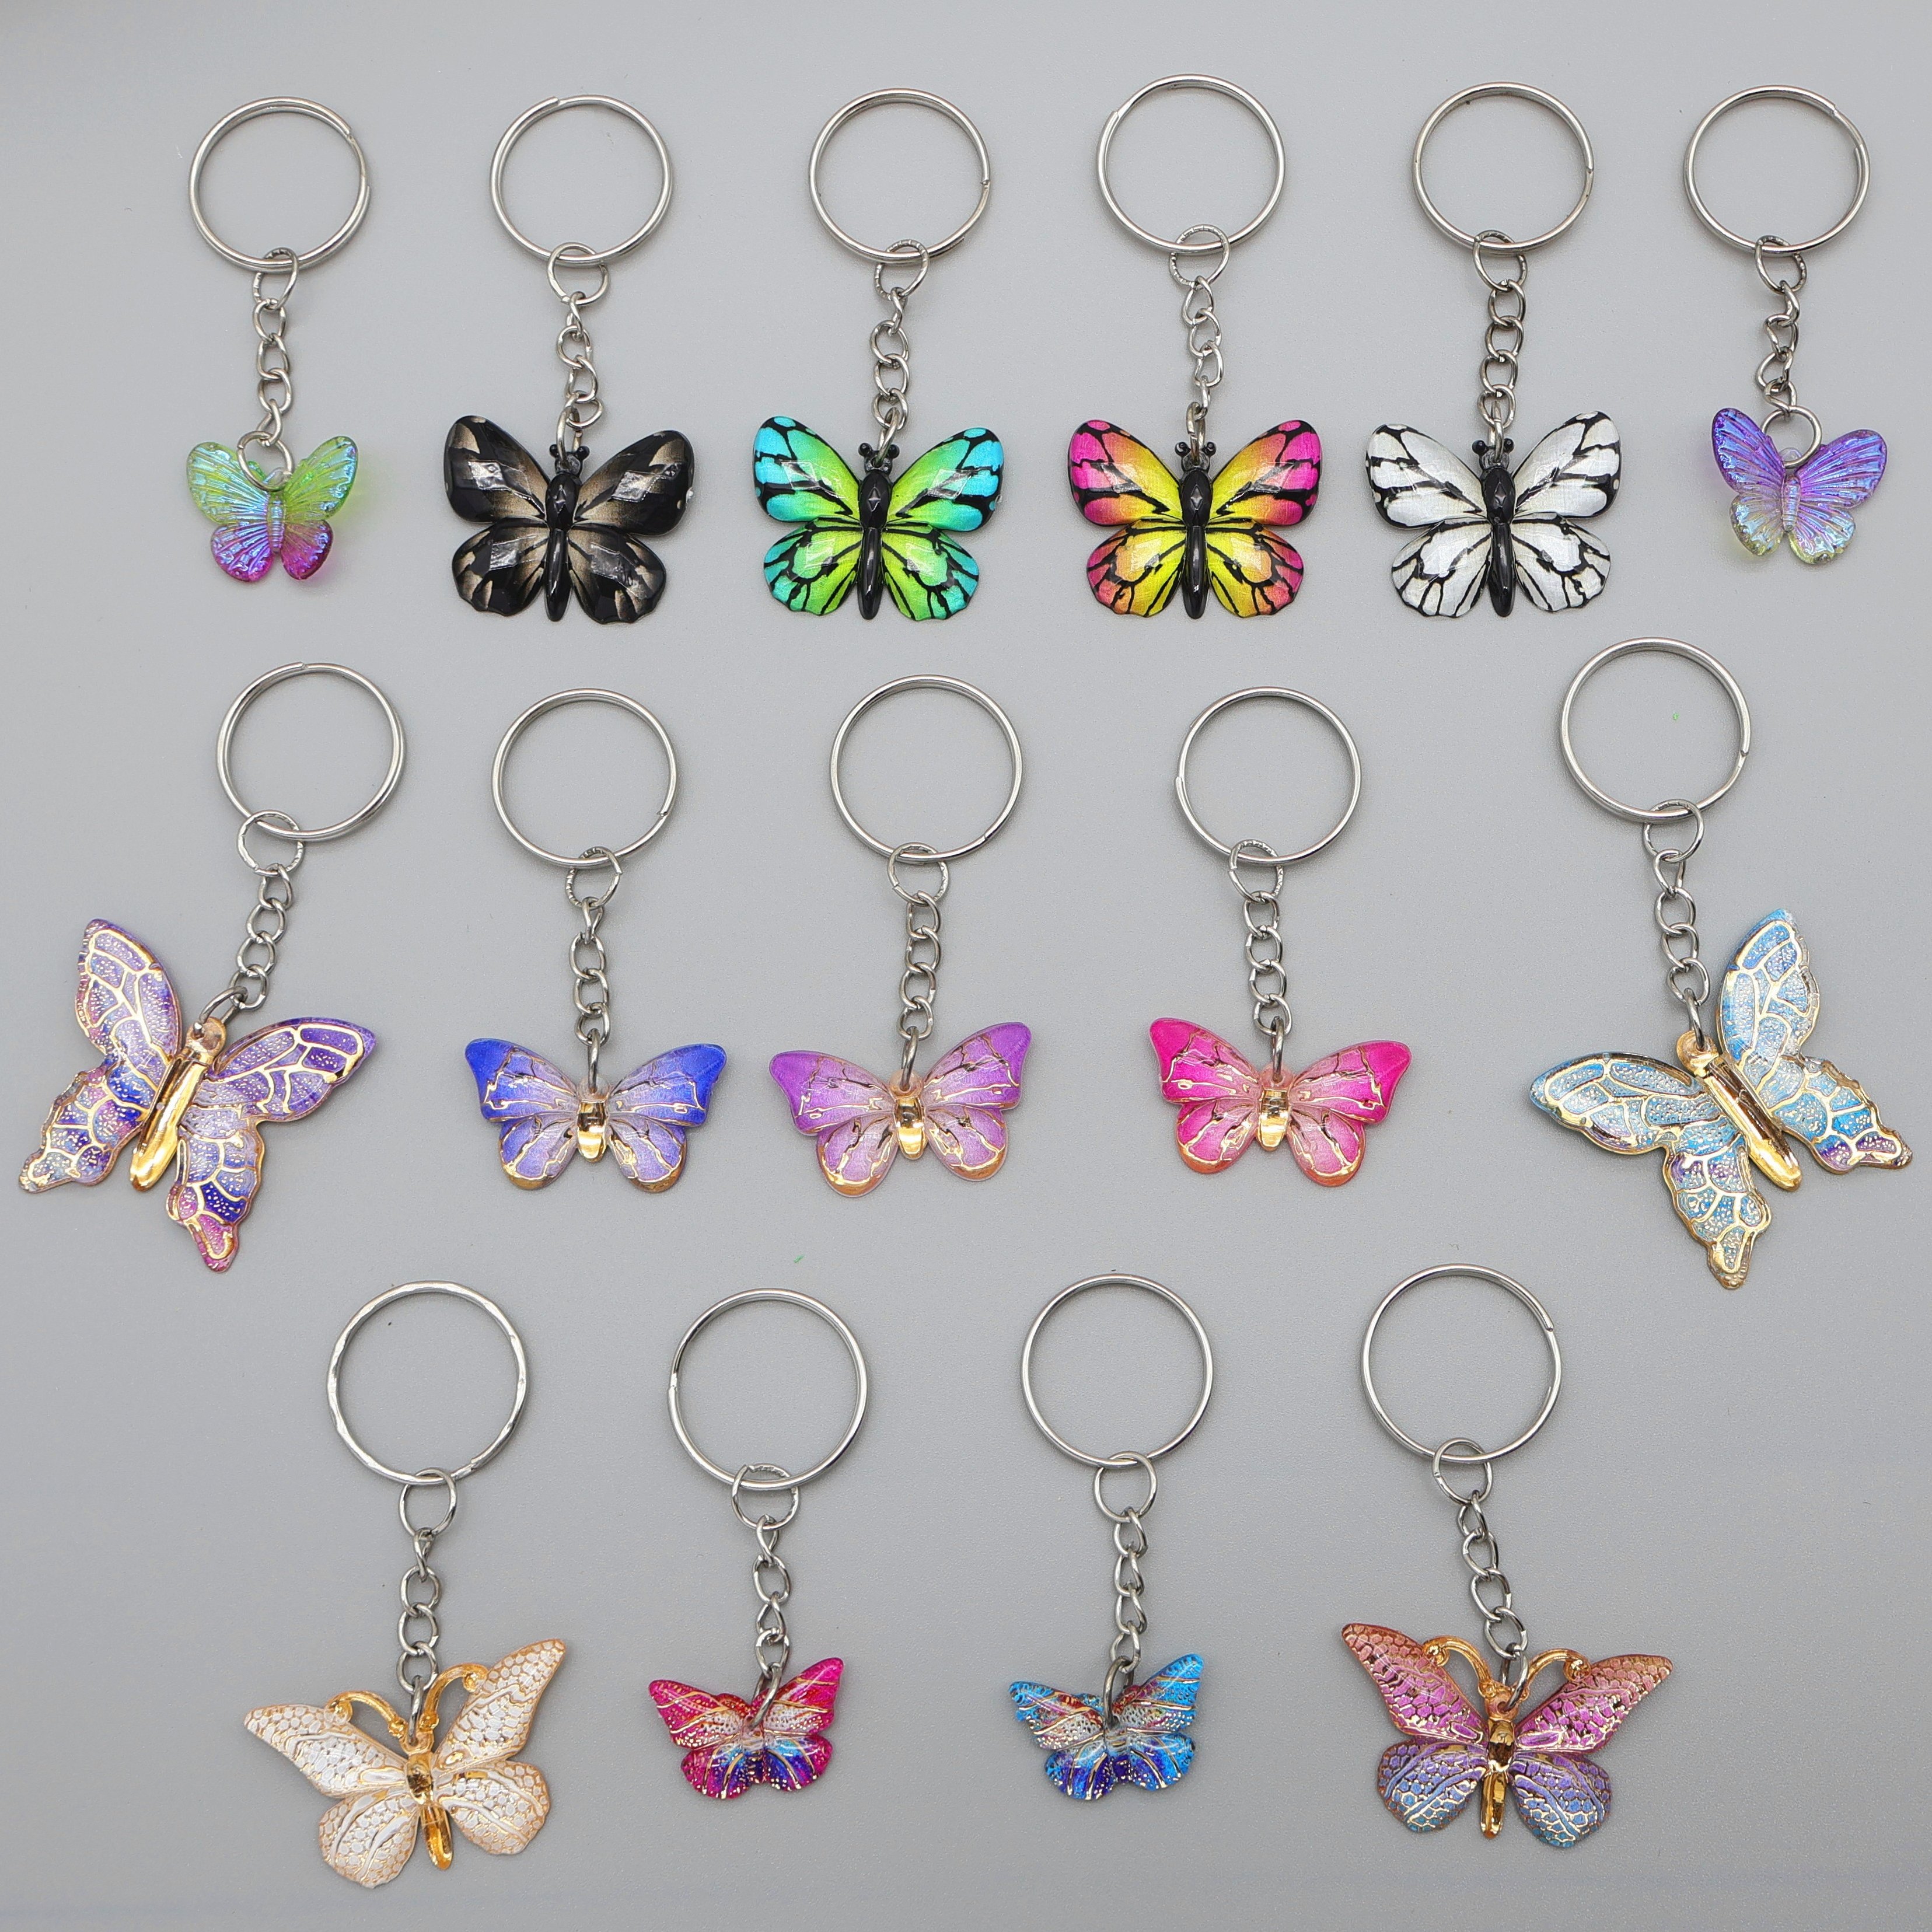 Butterfly Motivational Gift Caterpillar Inspirational Keychain for Friends  Coworkers Sister Daughters